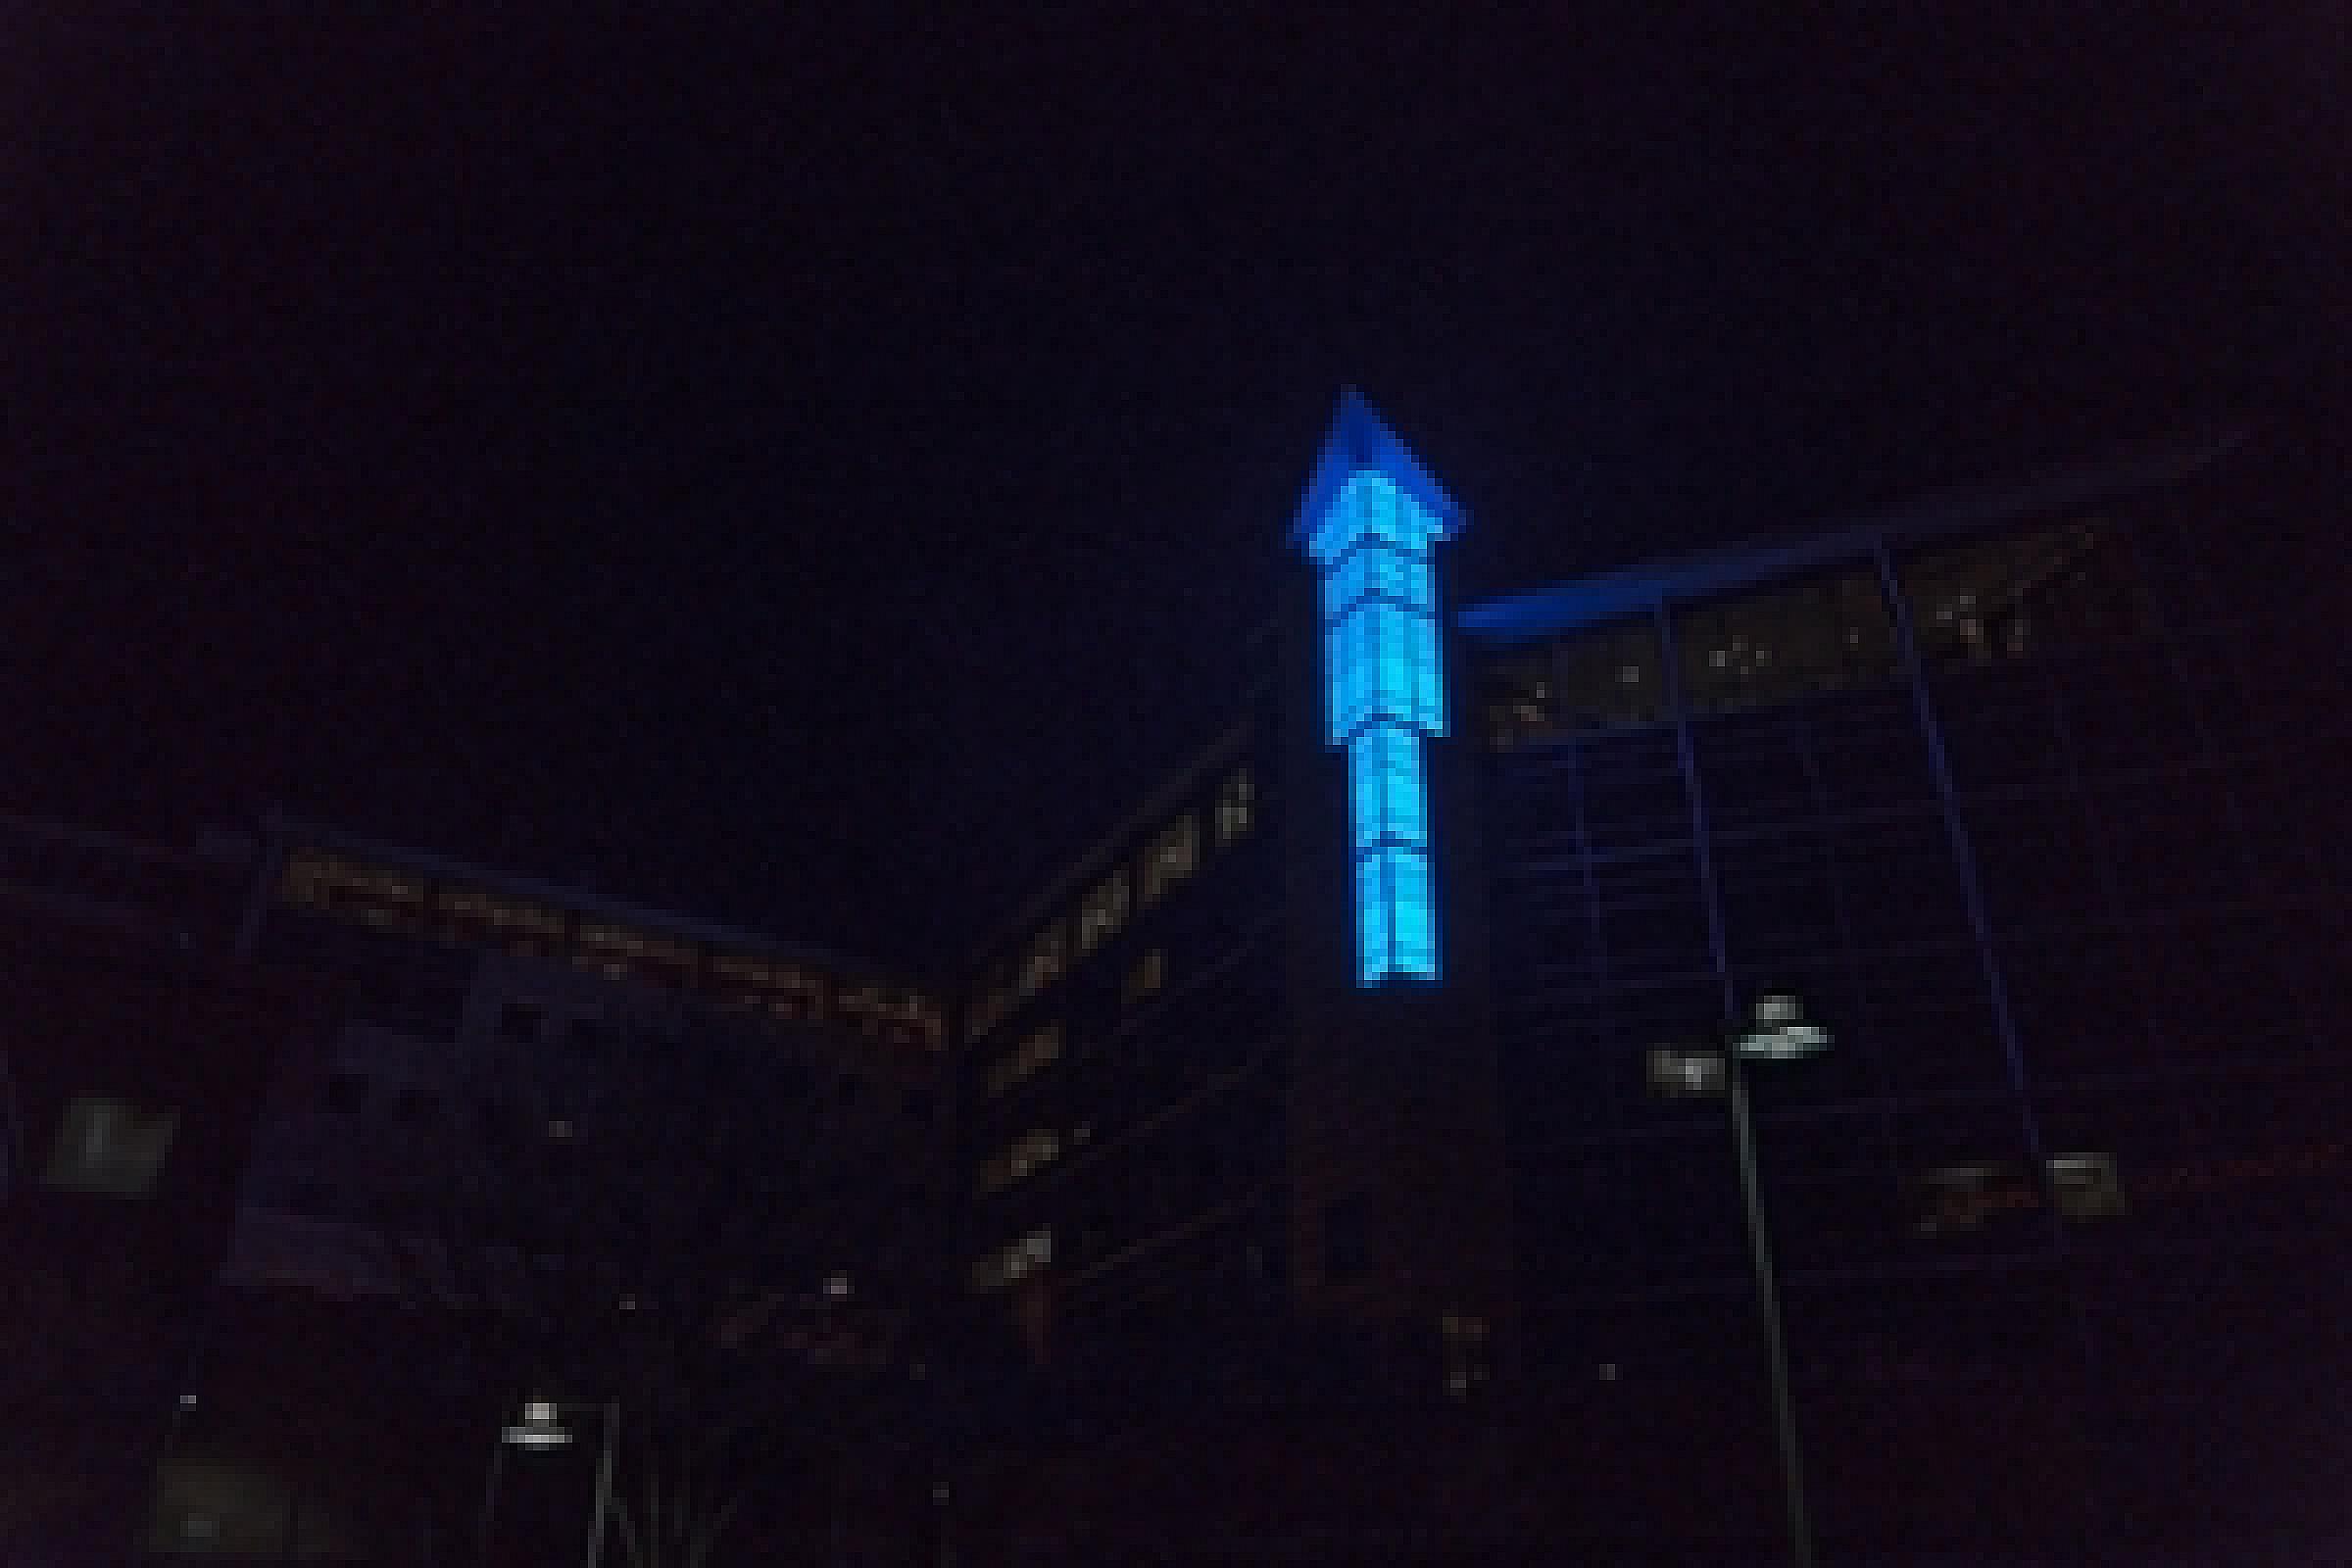 Beacon lit with blue light at night